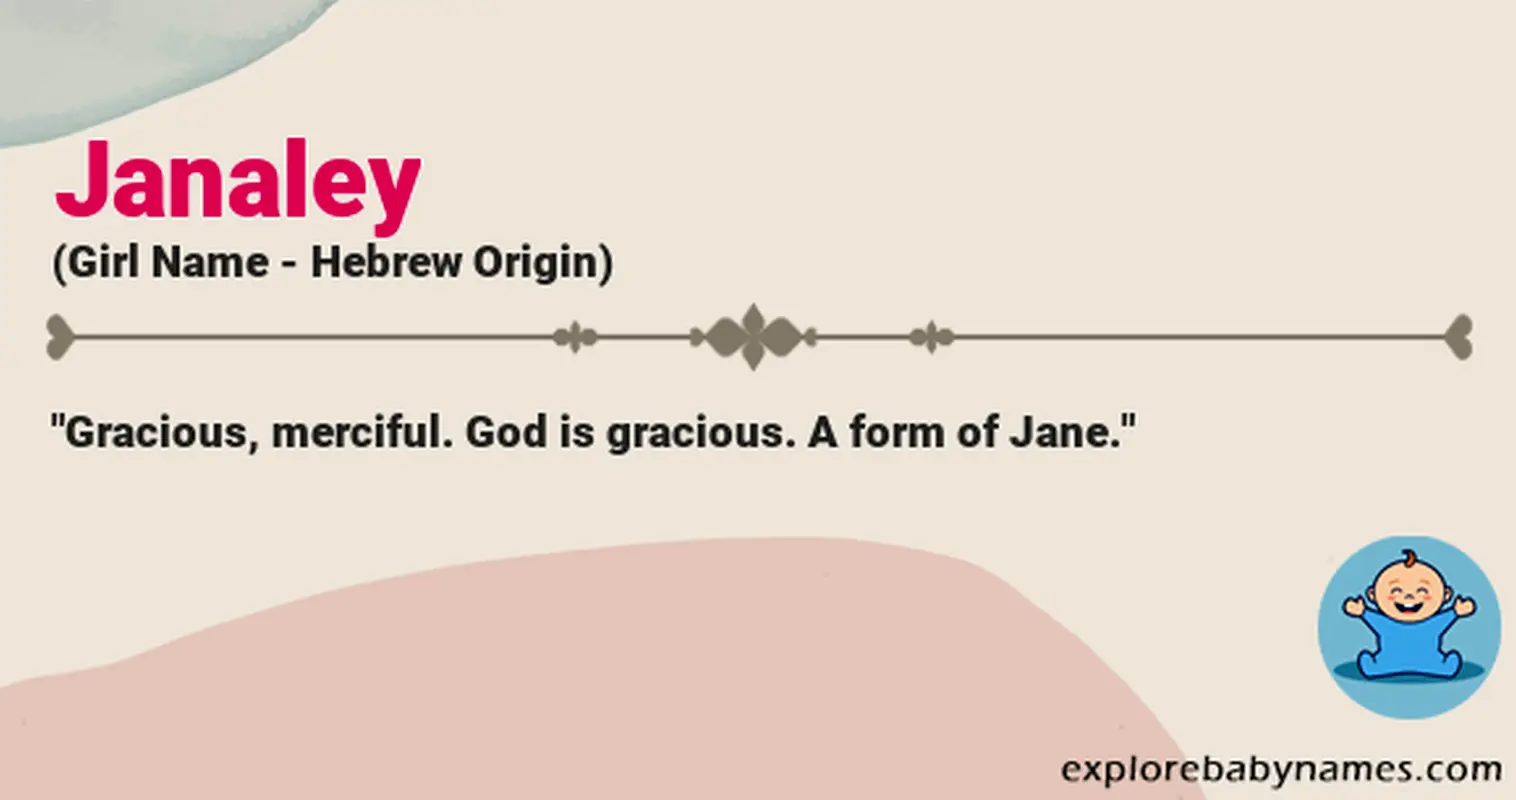 Meaning of Janaley